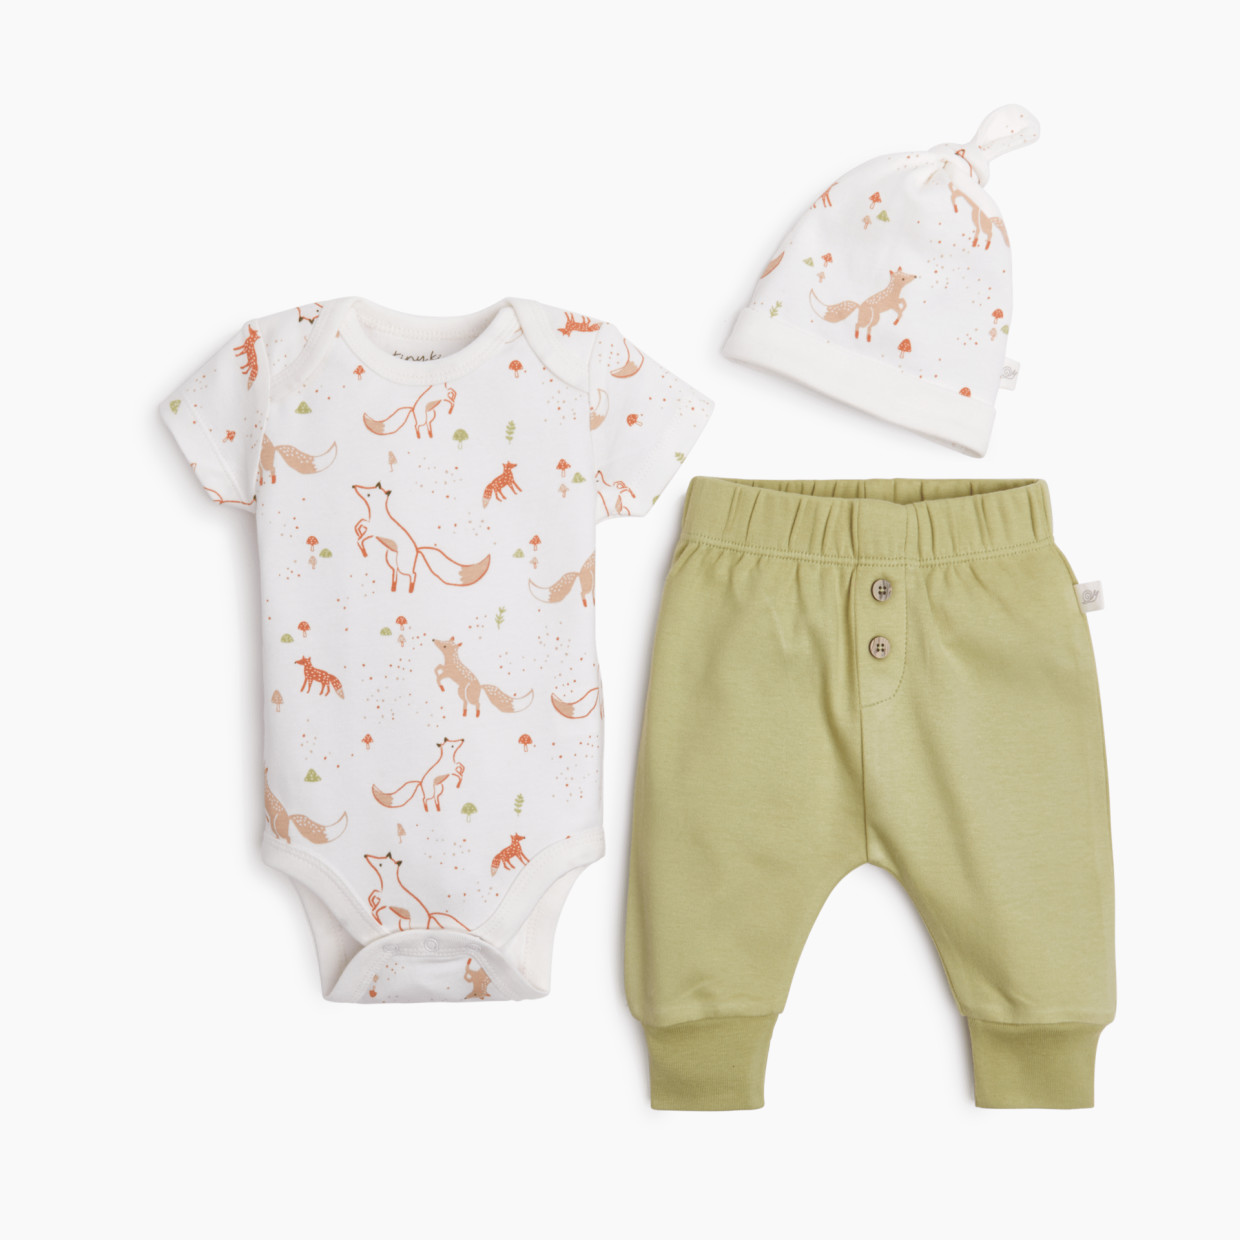 Tiny Kind The Outfit 3 Piece Set - Baby Fox, 9-12 M.